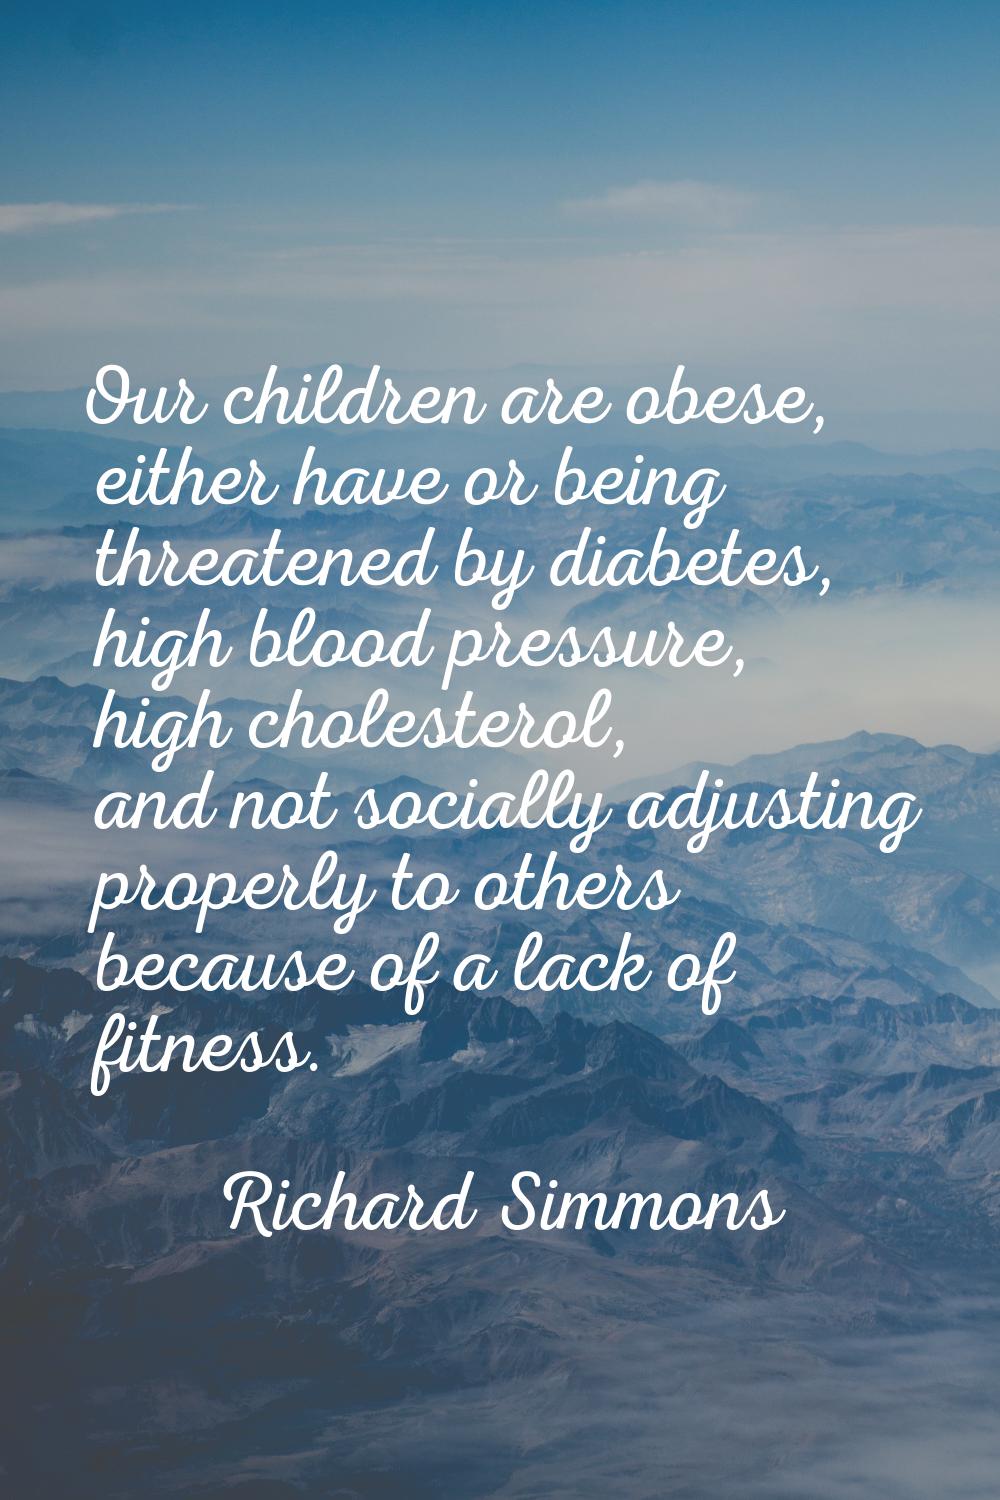 Our children are obese, either have or being threatened by diabetes, high blood pressure, high chol